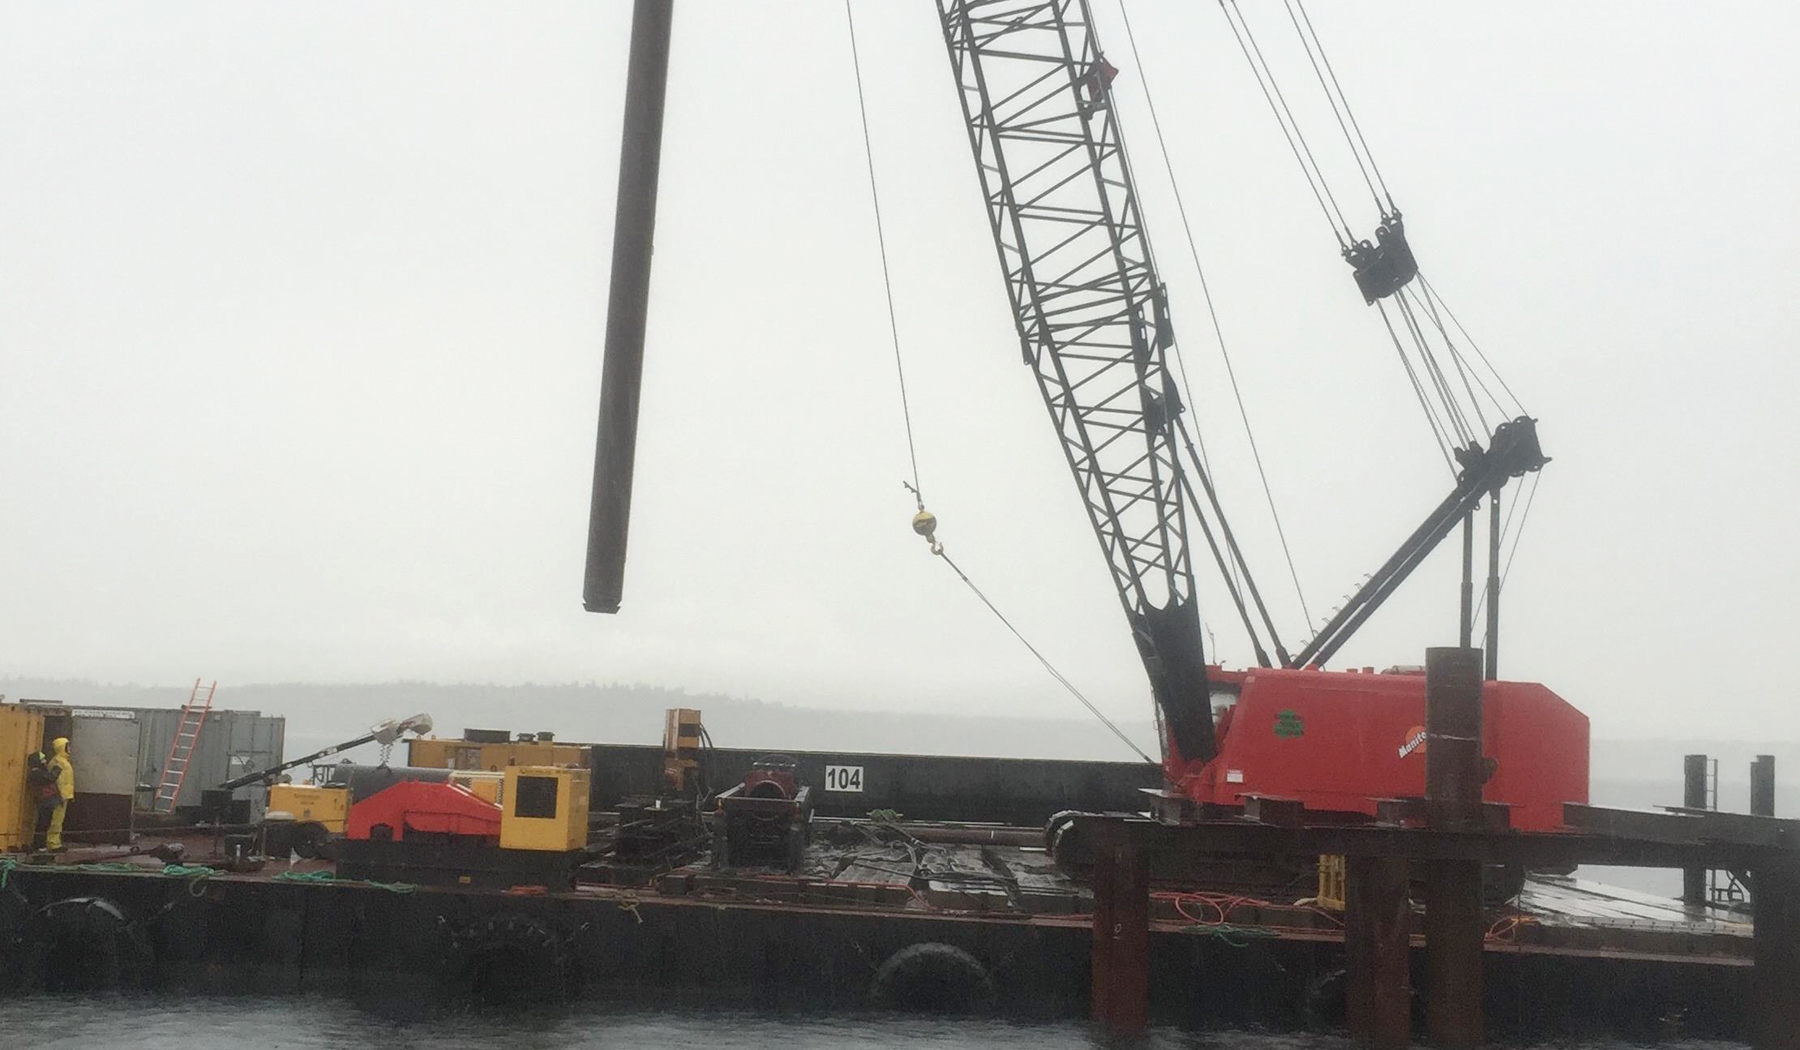 Pile driving at the Vashon Island ferry terminal